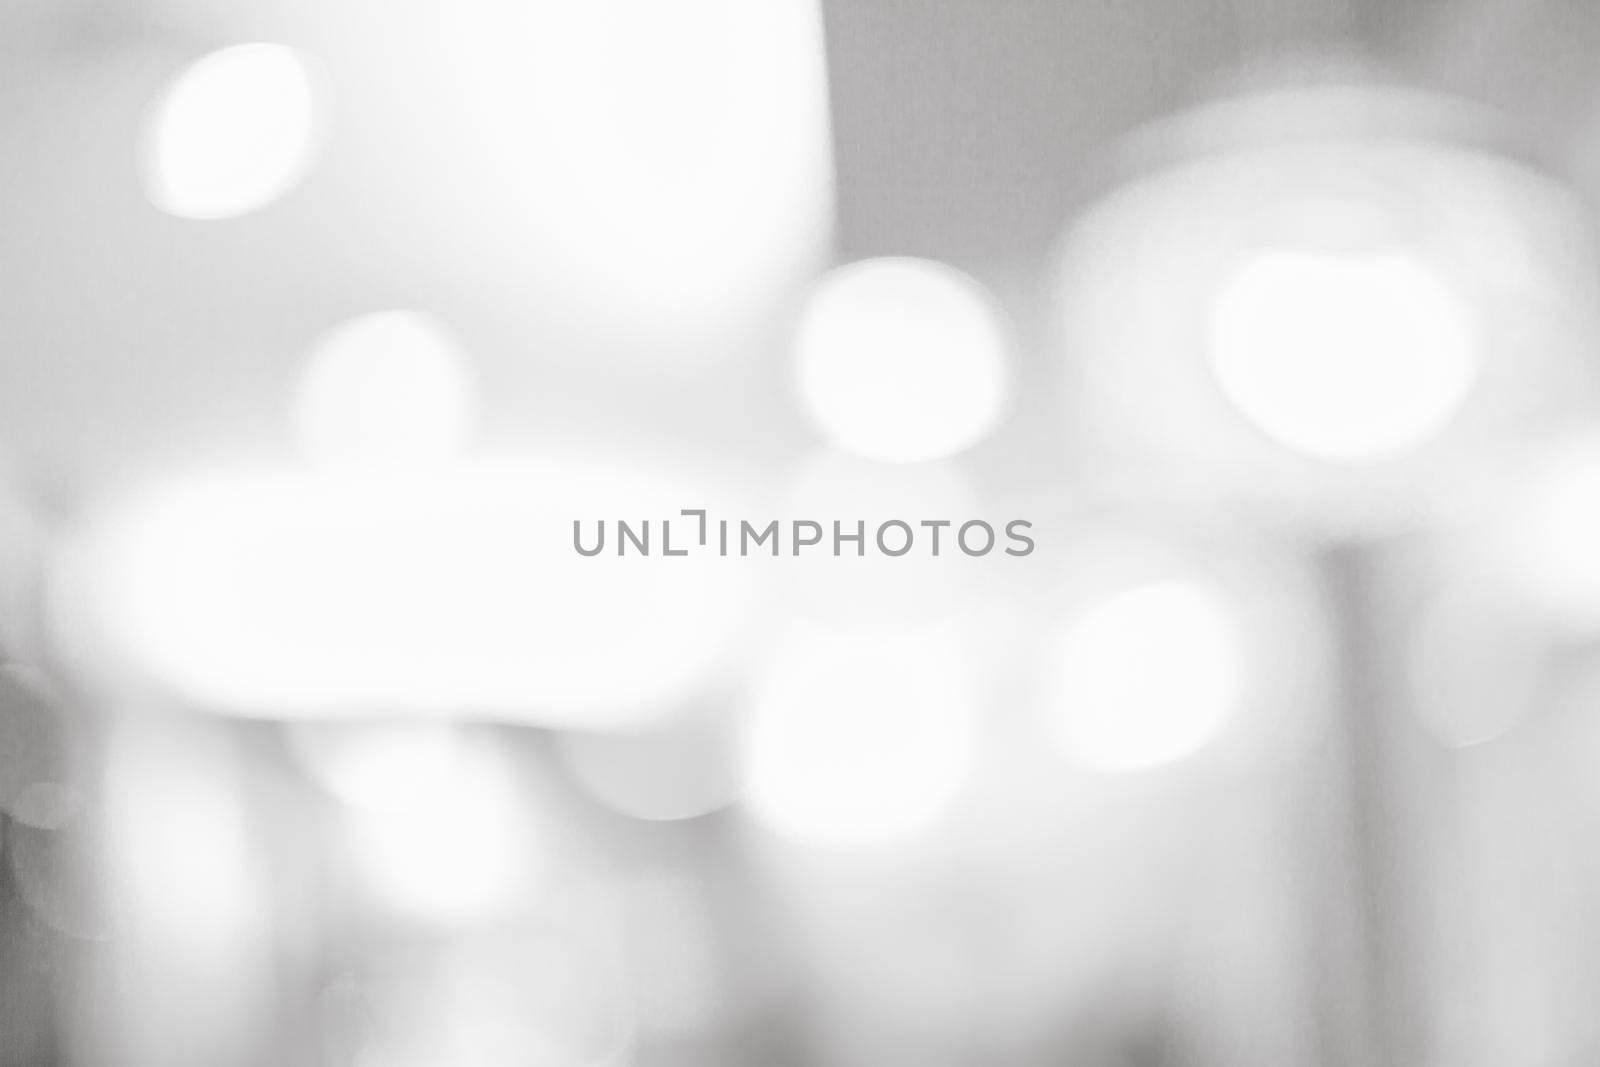 Grey or White blurred of department store background. Defocused blur background